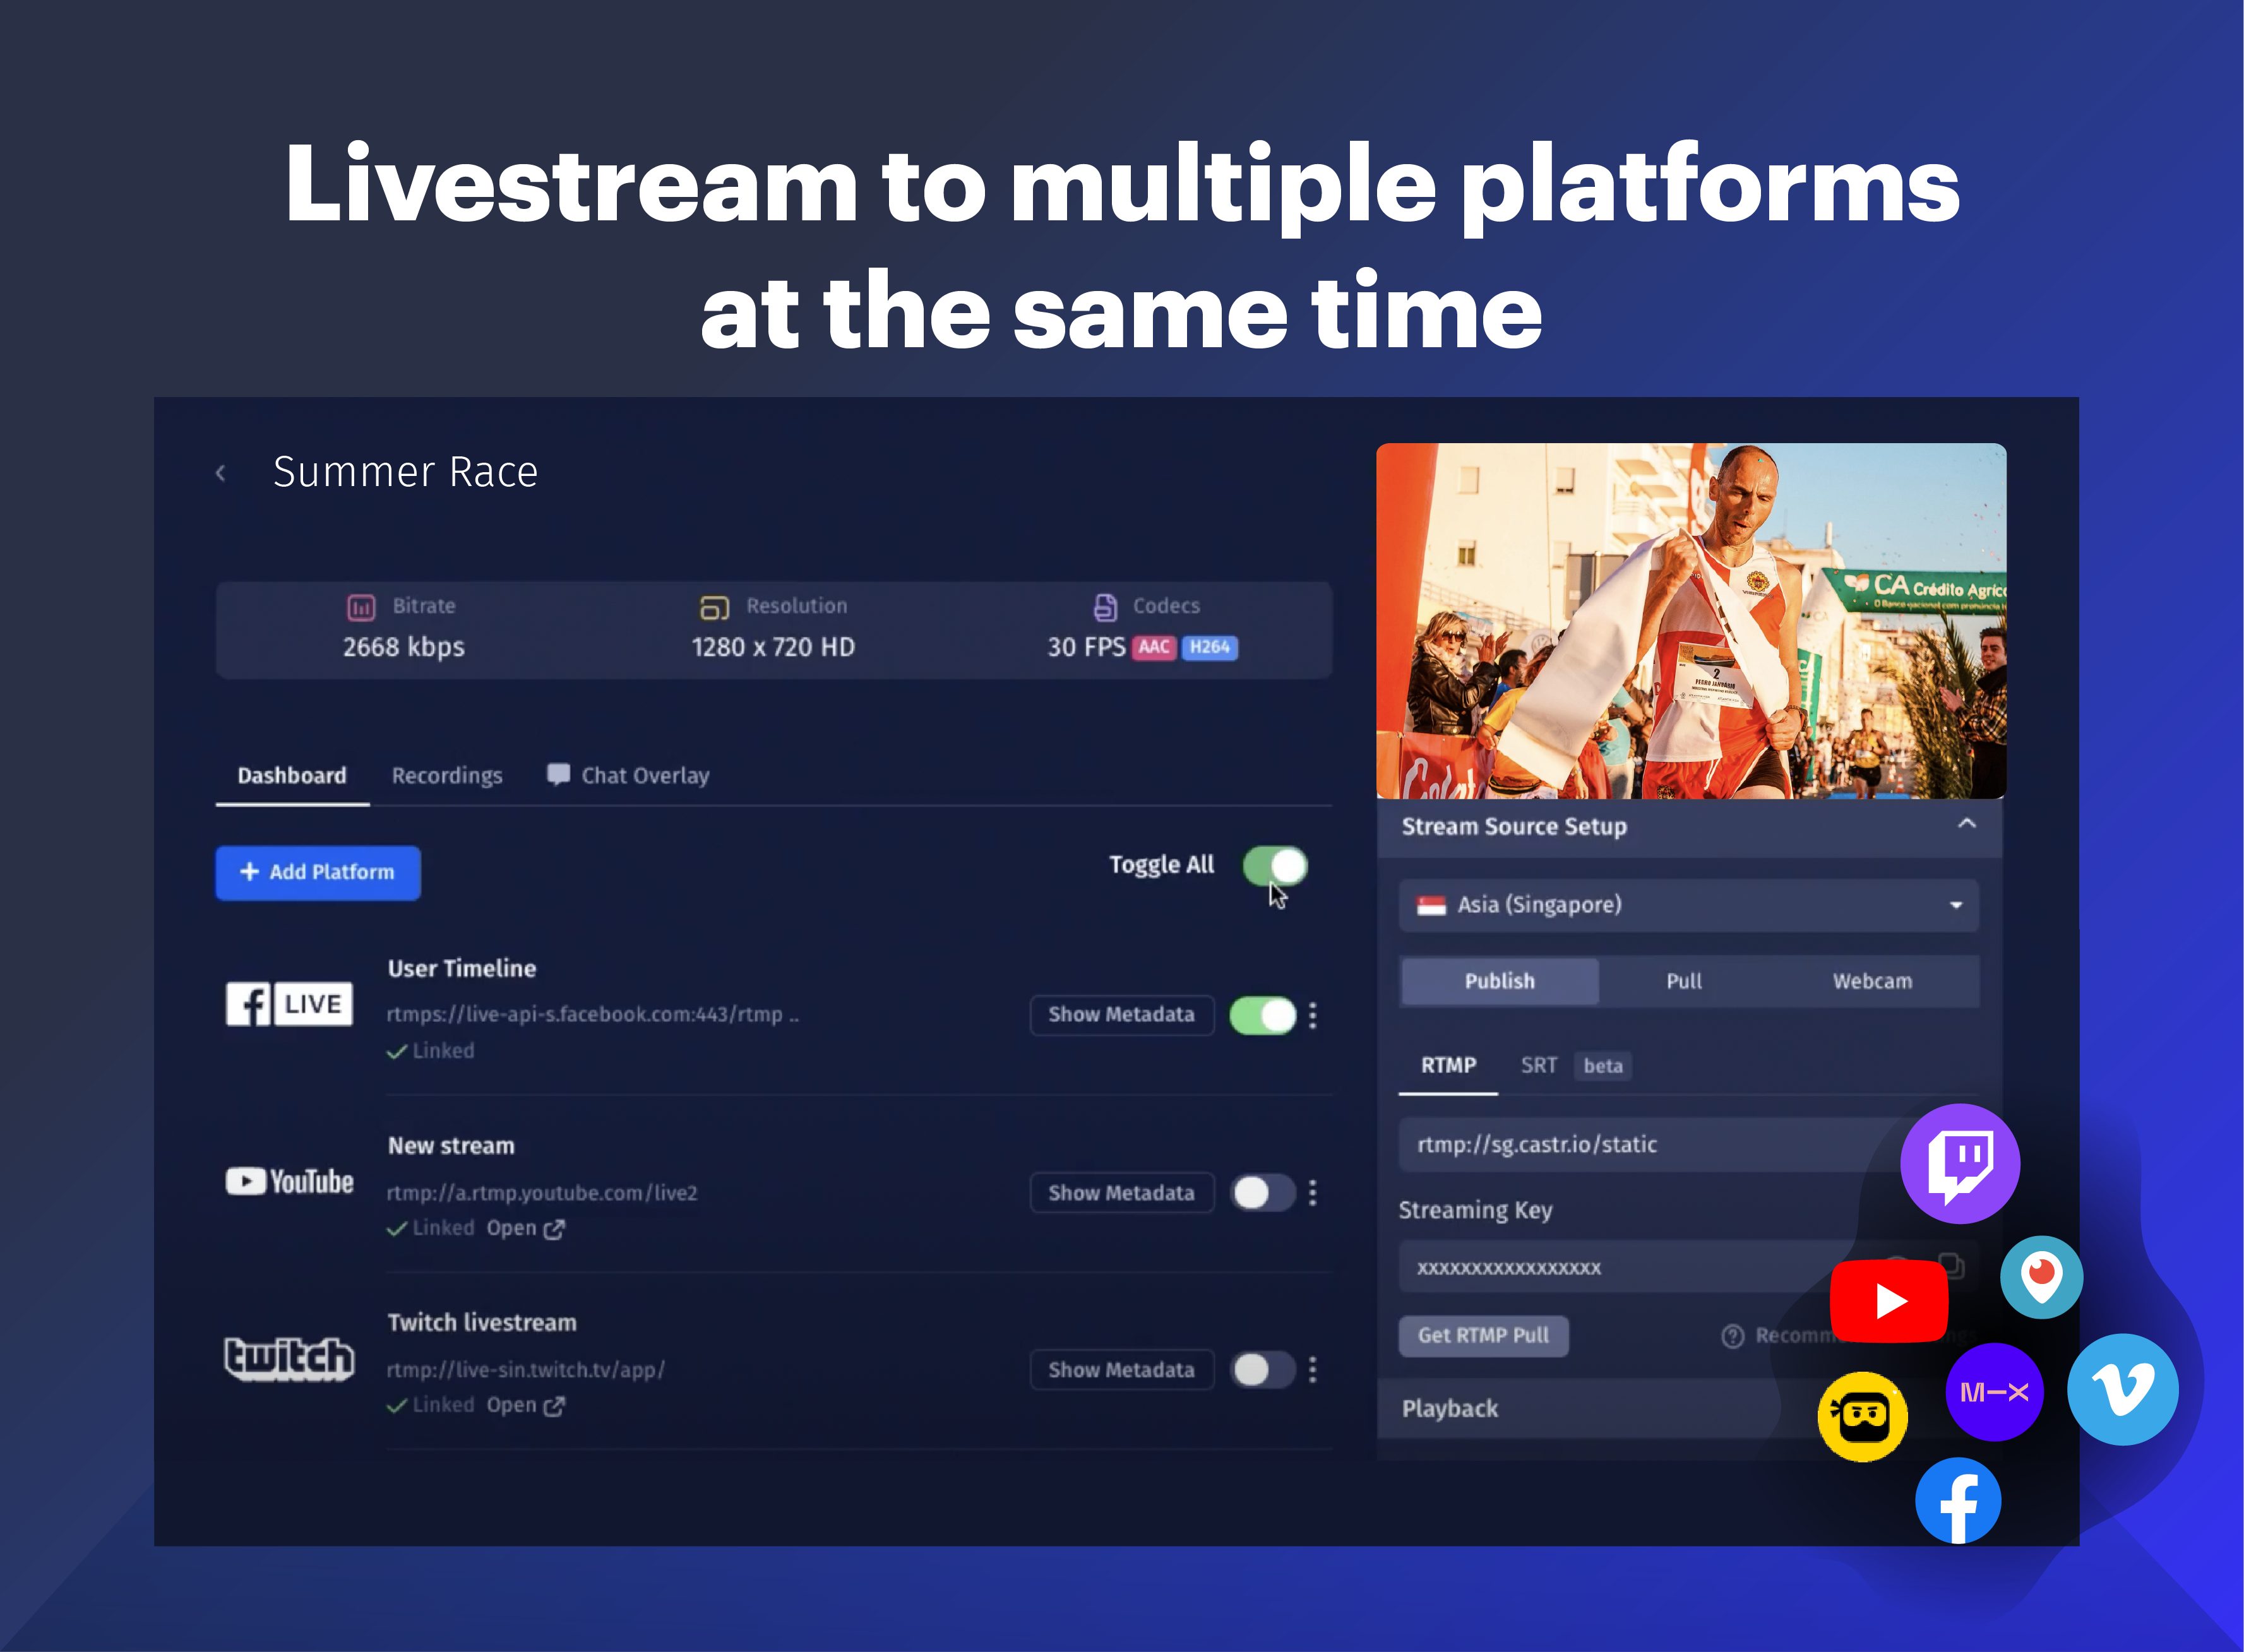 Livestream to multiple platforms at the same time